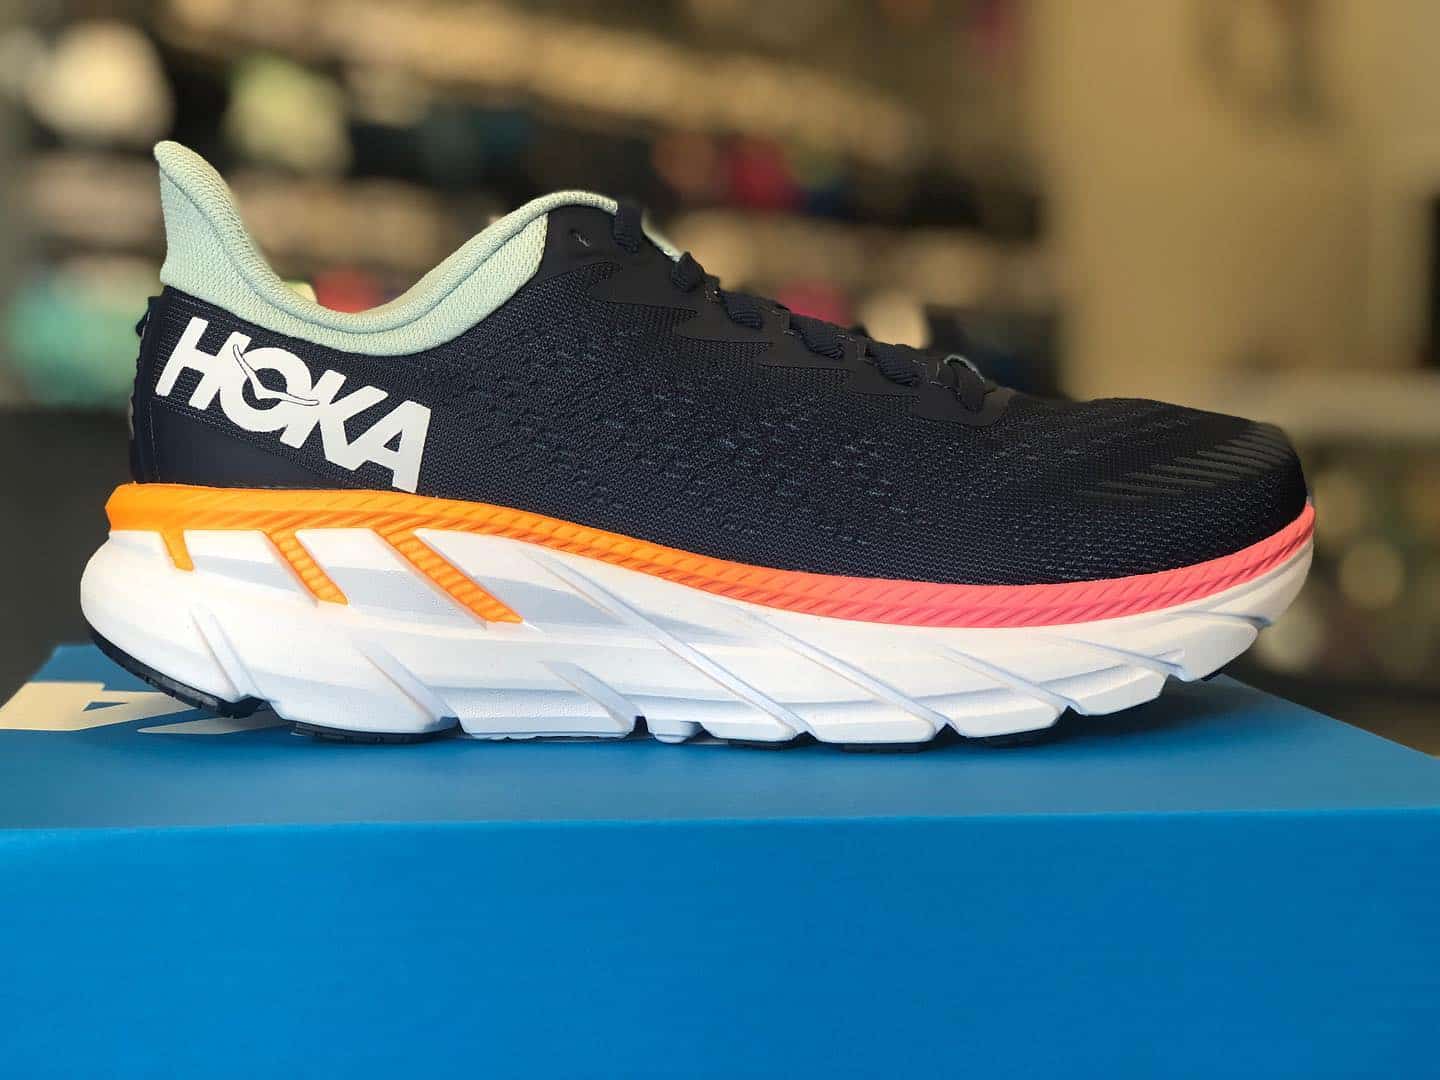 What Shoes Are Comparable to Hoka?